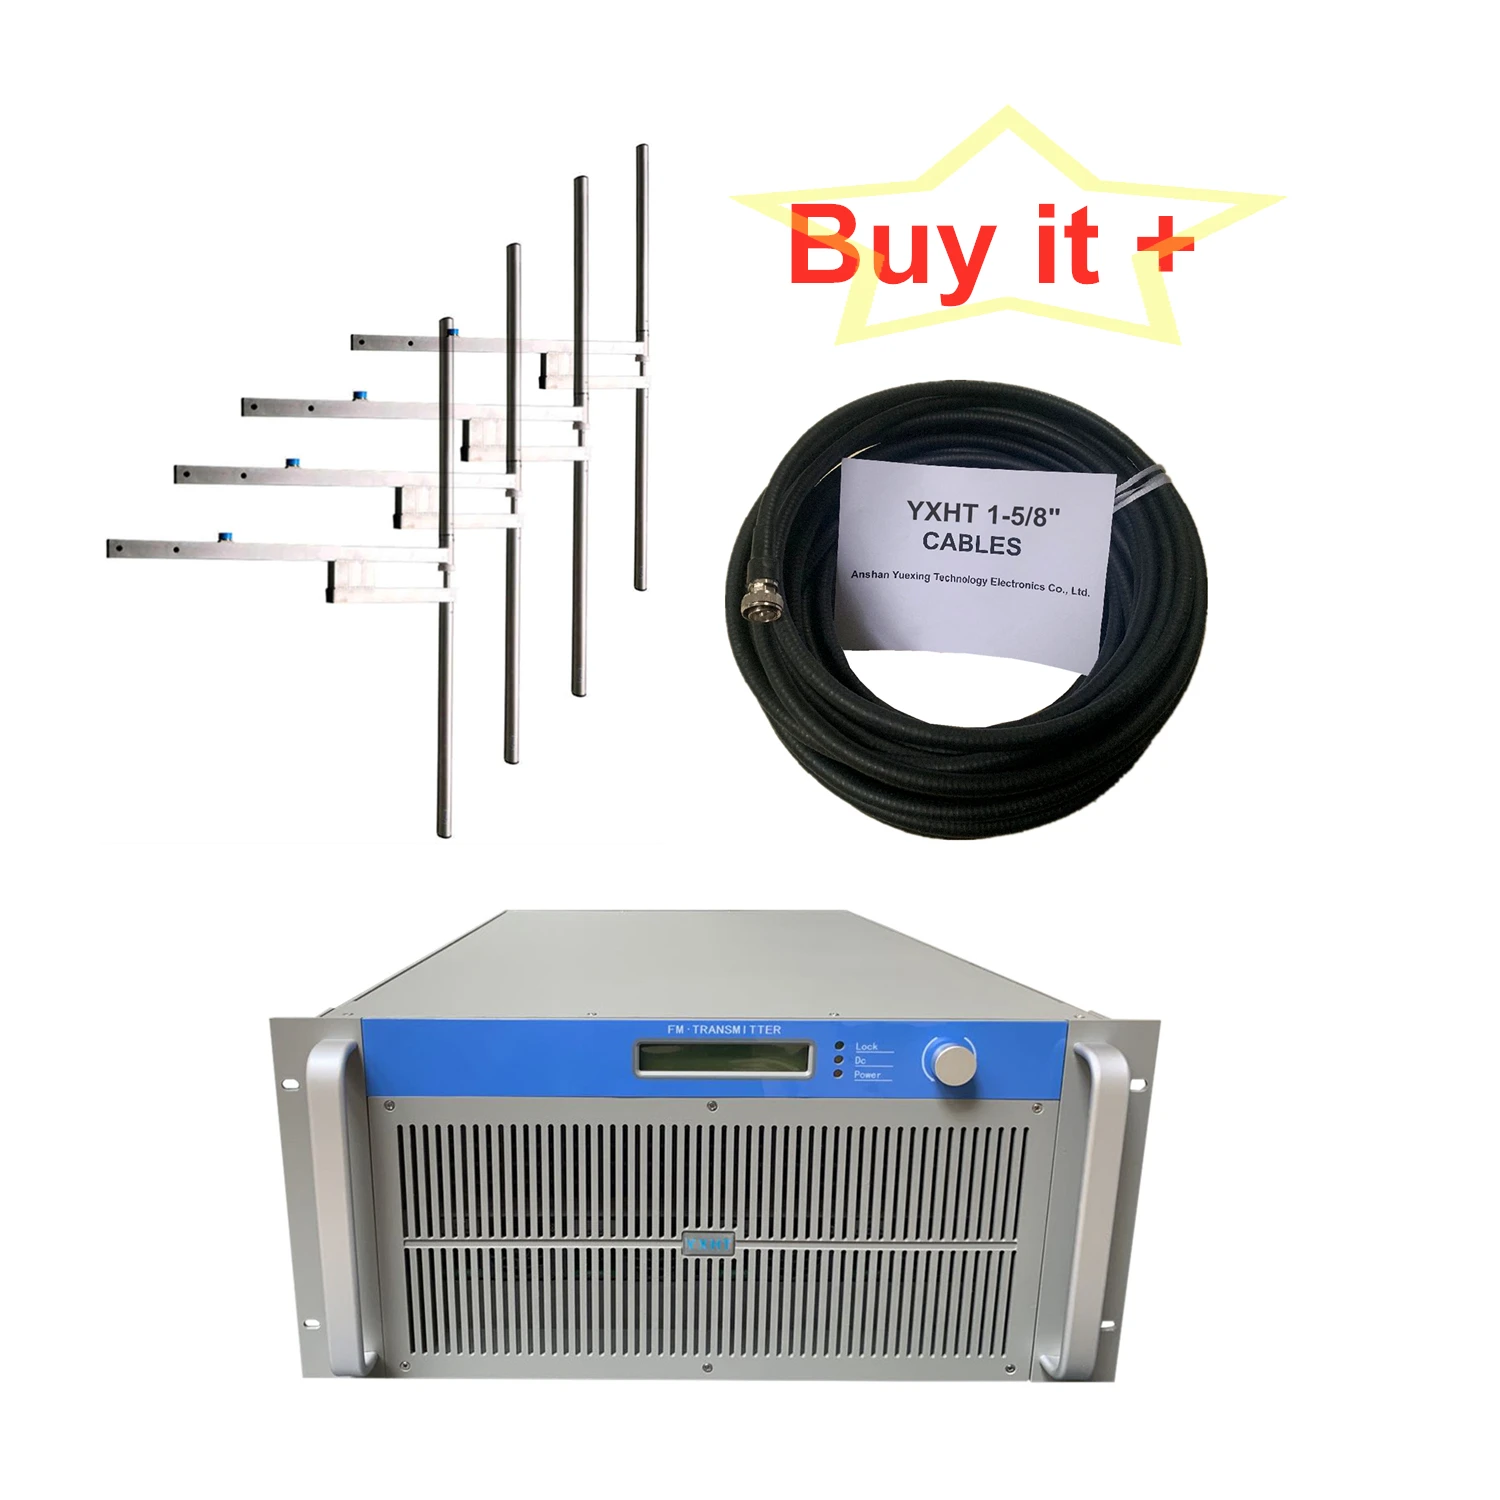 

3KW FM Radio Broadcast Transmitter + 4-Bay Antenna + 30 Meters Cables with Connector 3 sets of Equipments for Radio Station